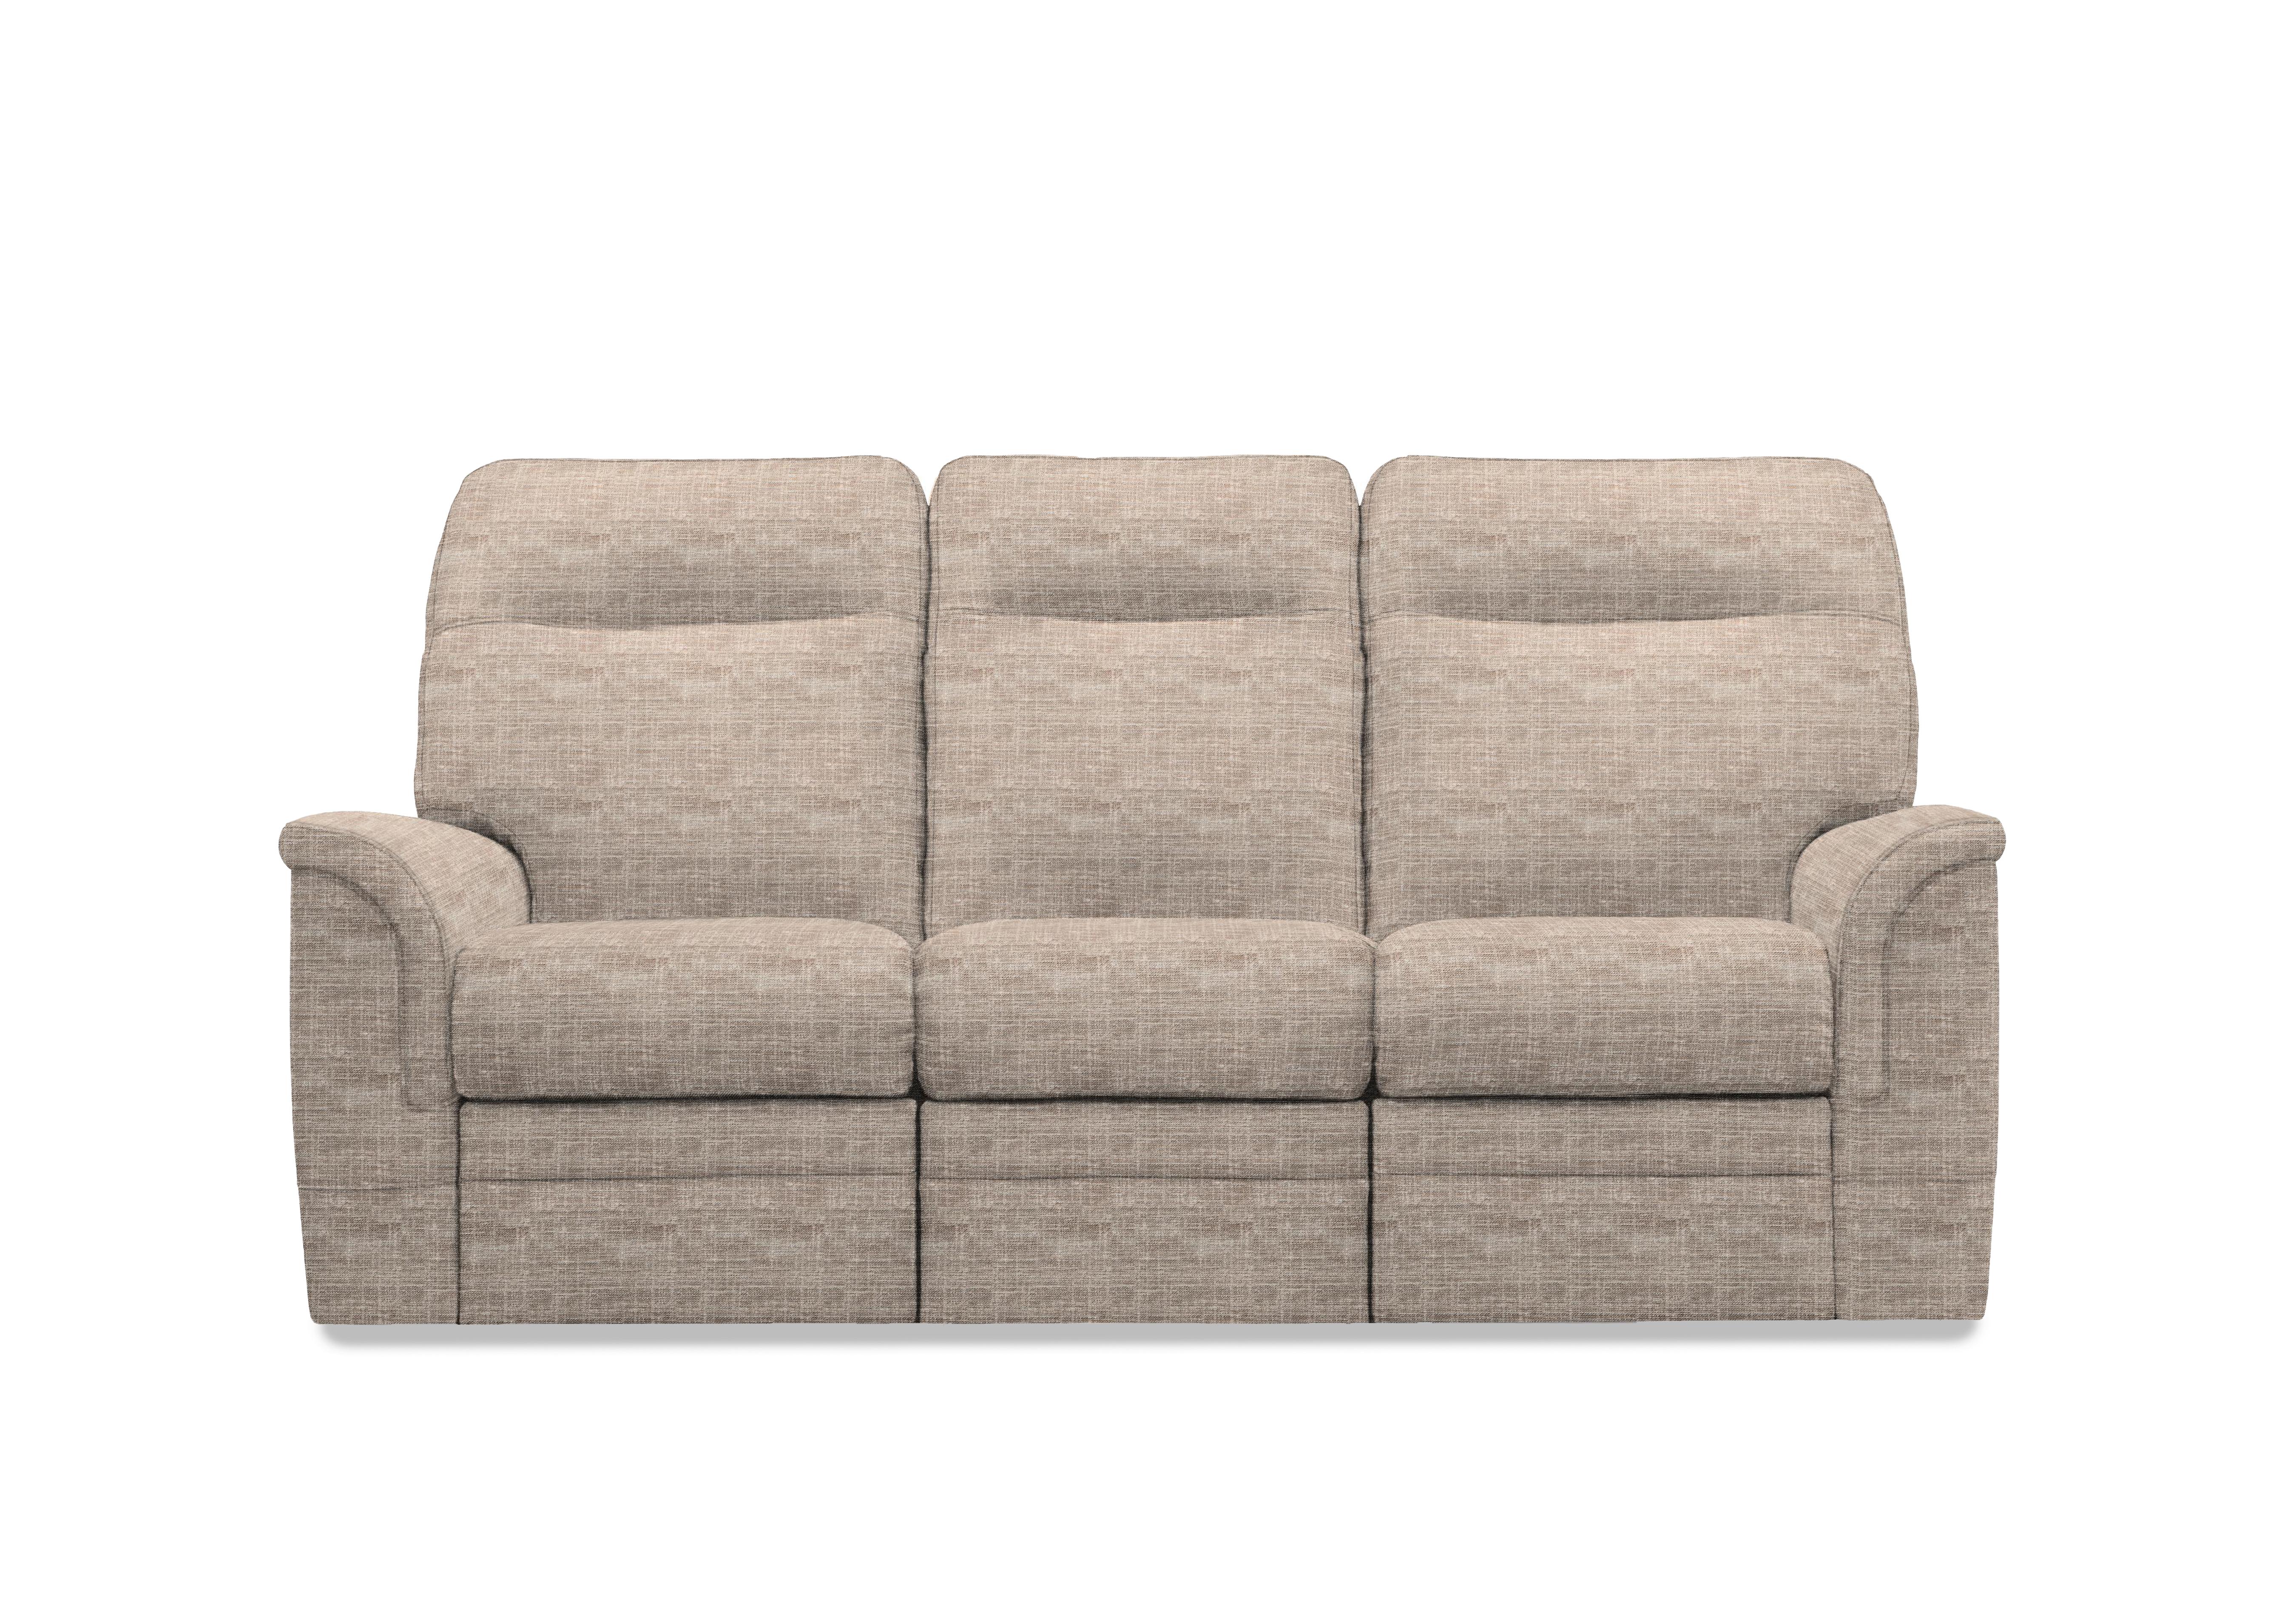 Hudson 23 Fabric 3 Seater Power Recliner Sofa with Power Headrests and Power Lumbar in Dash Oatmeal 001497-0051 on Furniture Village